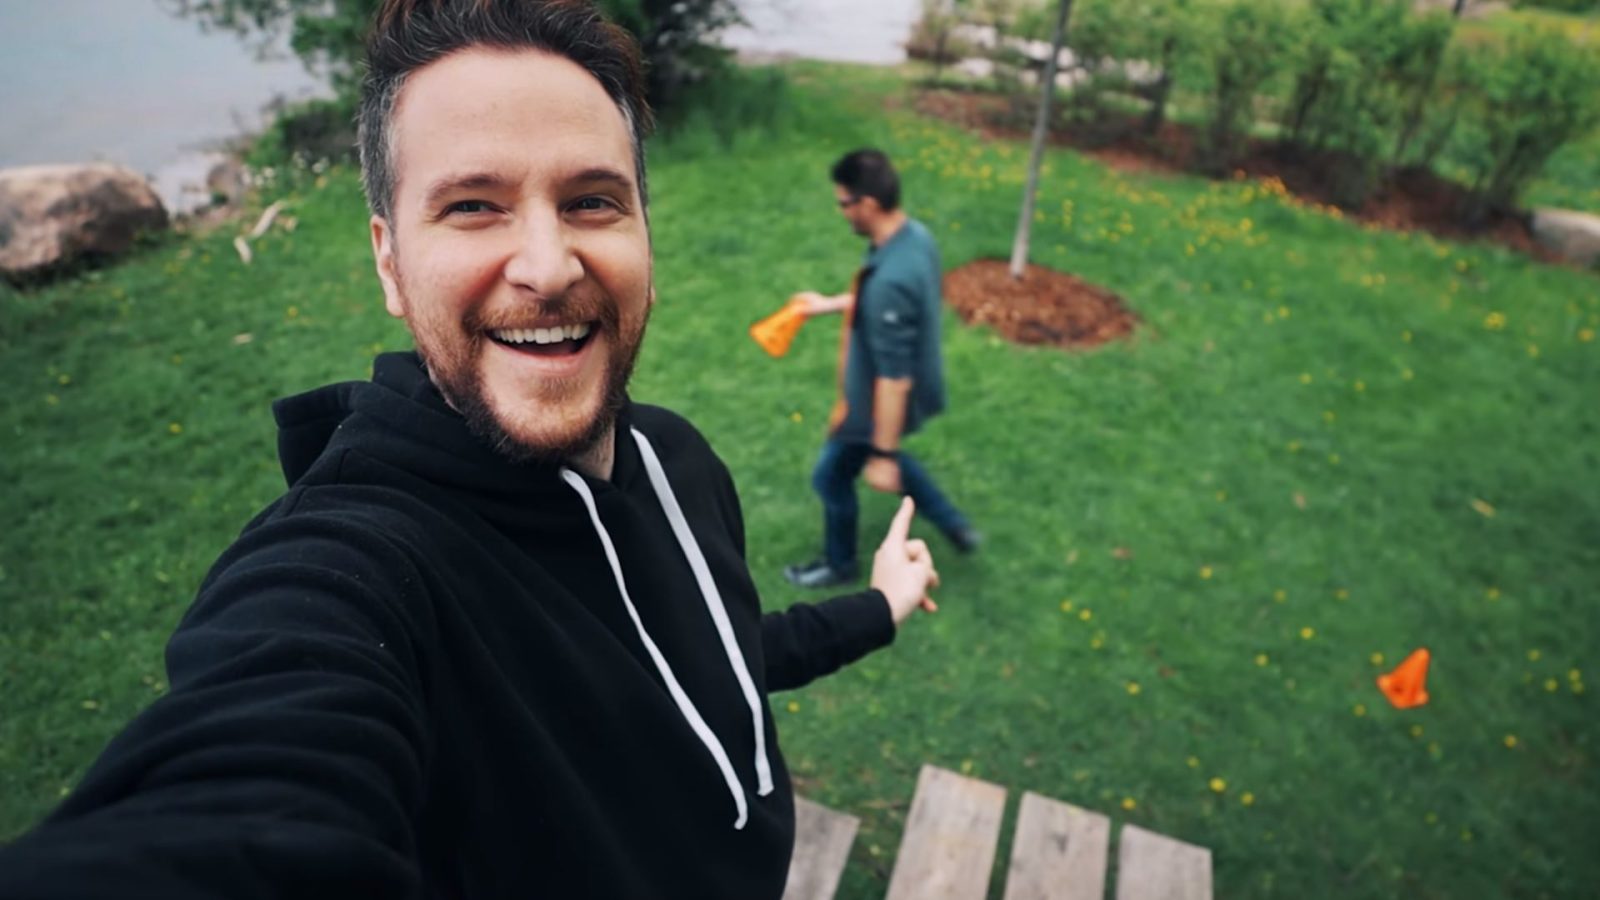 Flying your drone in Canada this summer? Watch Peter McKinnon's video first!